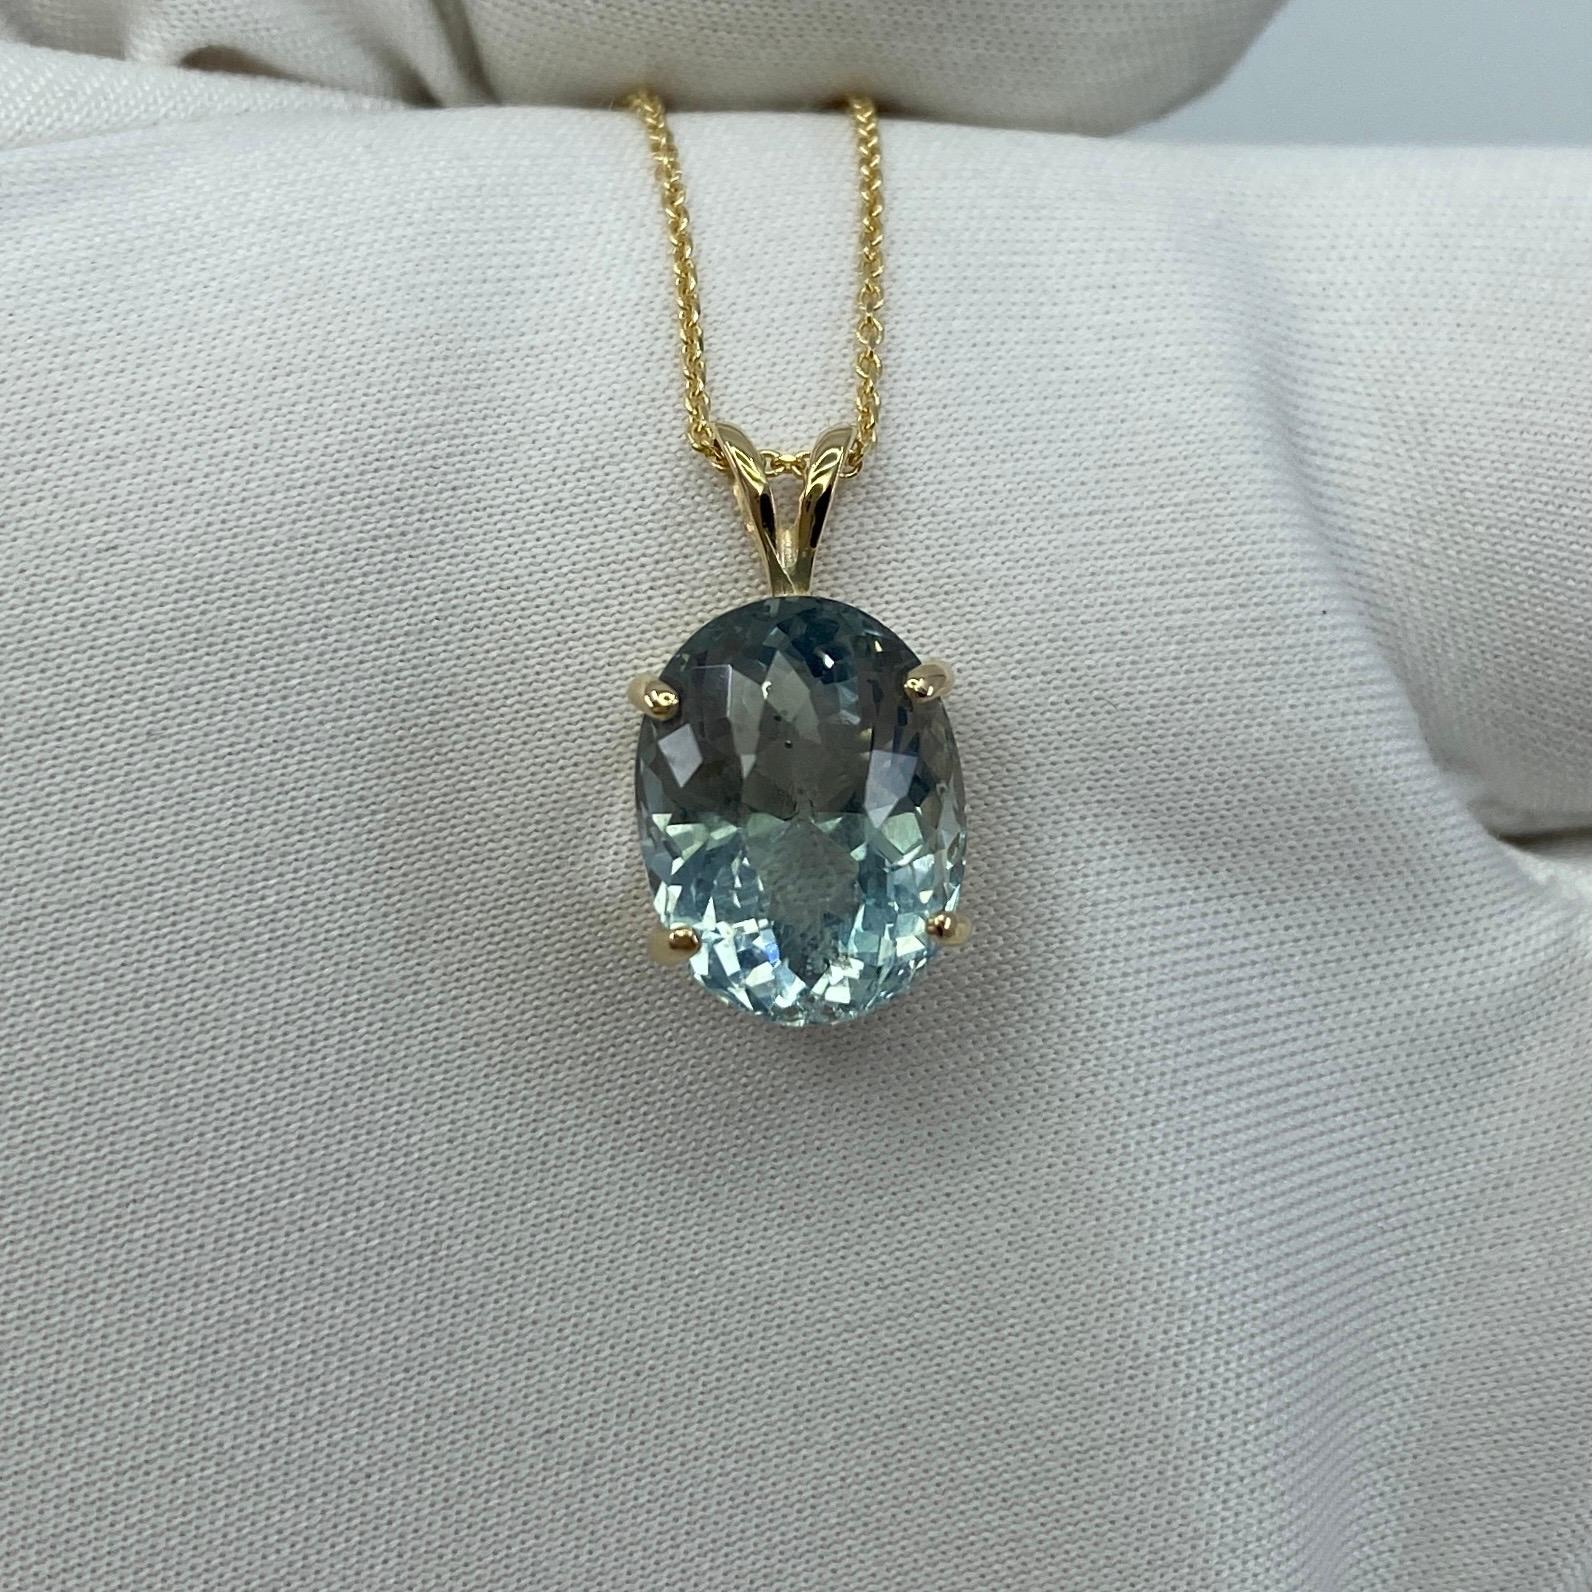 Fine Natural Greenish Blue Aquamarine Pendant Necklace.

4.82 Carat Aquamarine with a stunning unique greenish blue colour set in a fine 14k yellow gold solitaire pendant.
The aquamarine has  an excellent fancy oval cut showing lots of brightness